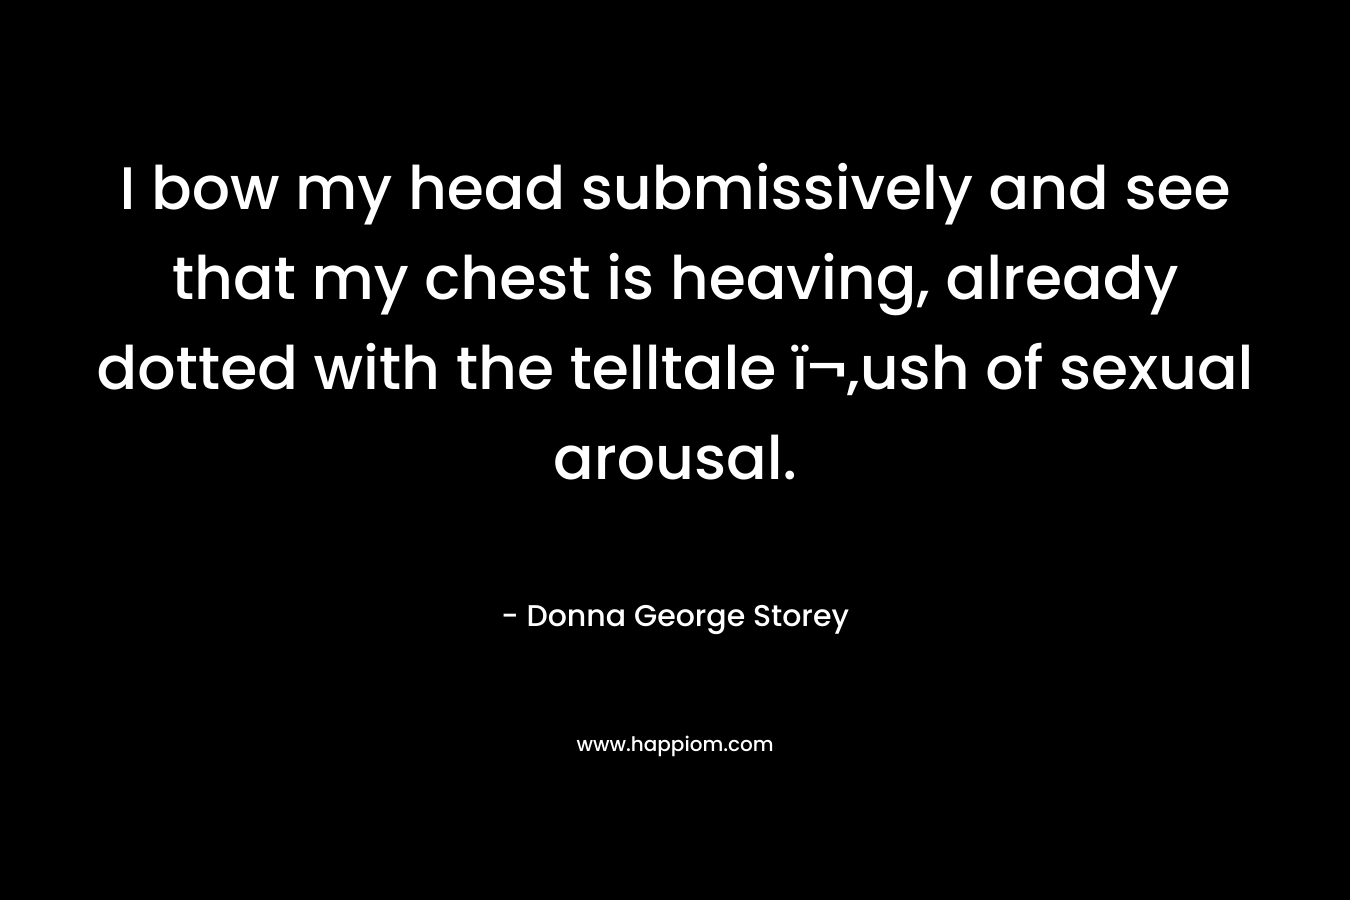 I bow my head submissively and see that my chest is heaving, already dotted with the telltale ï¬‚ush of sexual arousal. – Donna George Storey